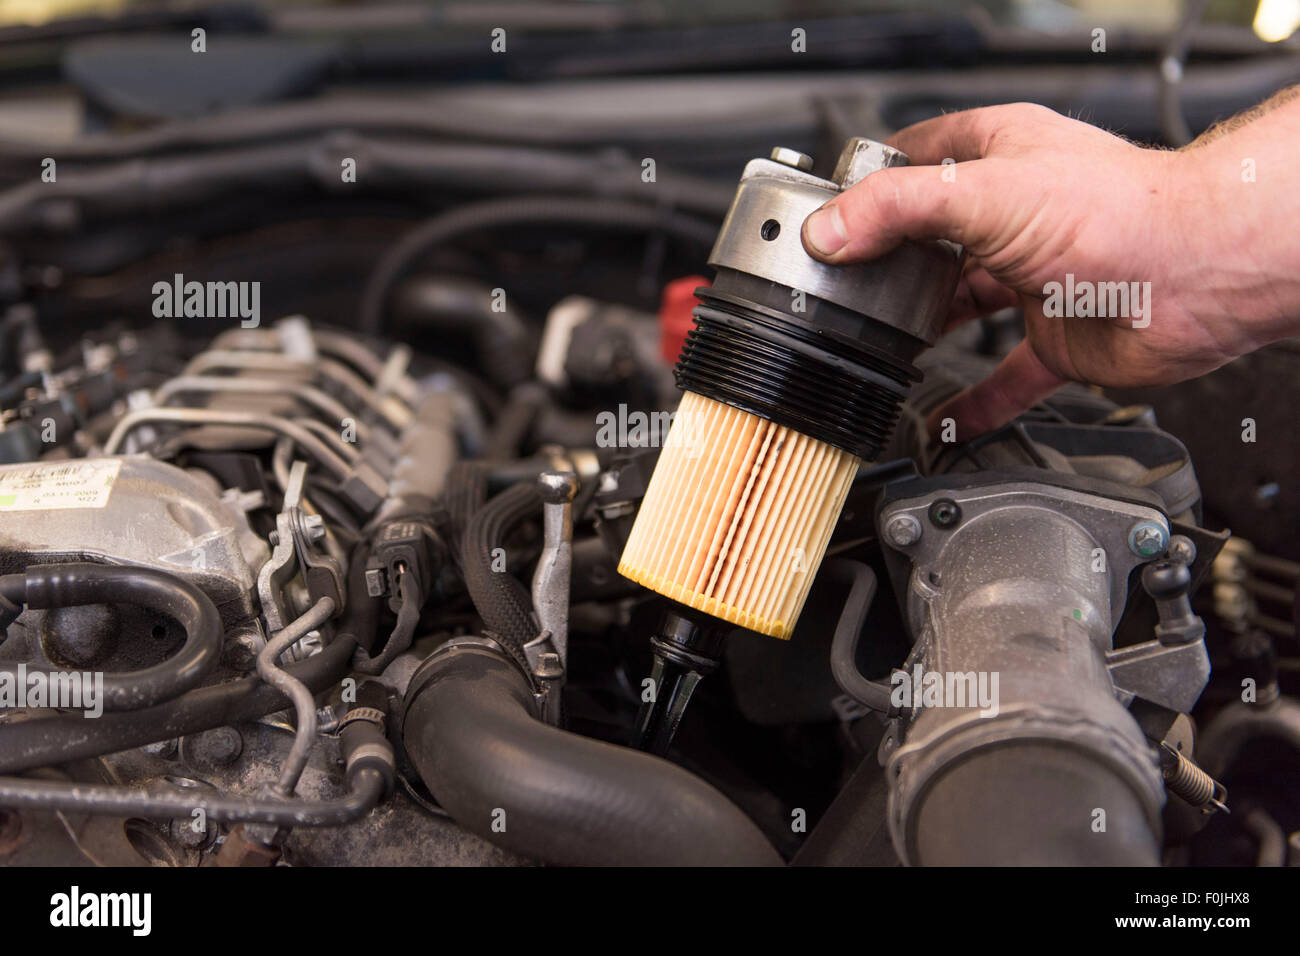 A car mechanic fits a new oil filter to a car during routine maintenance. Stock Photo